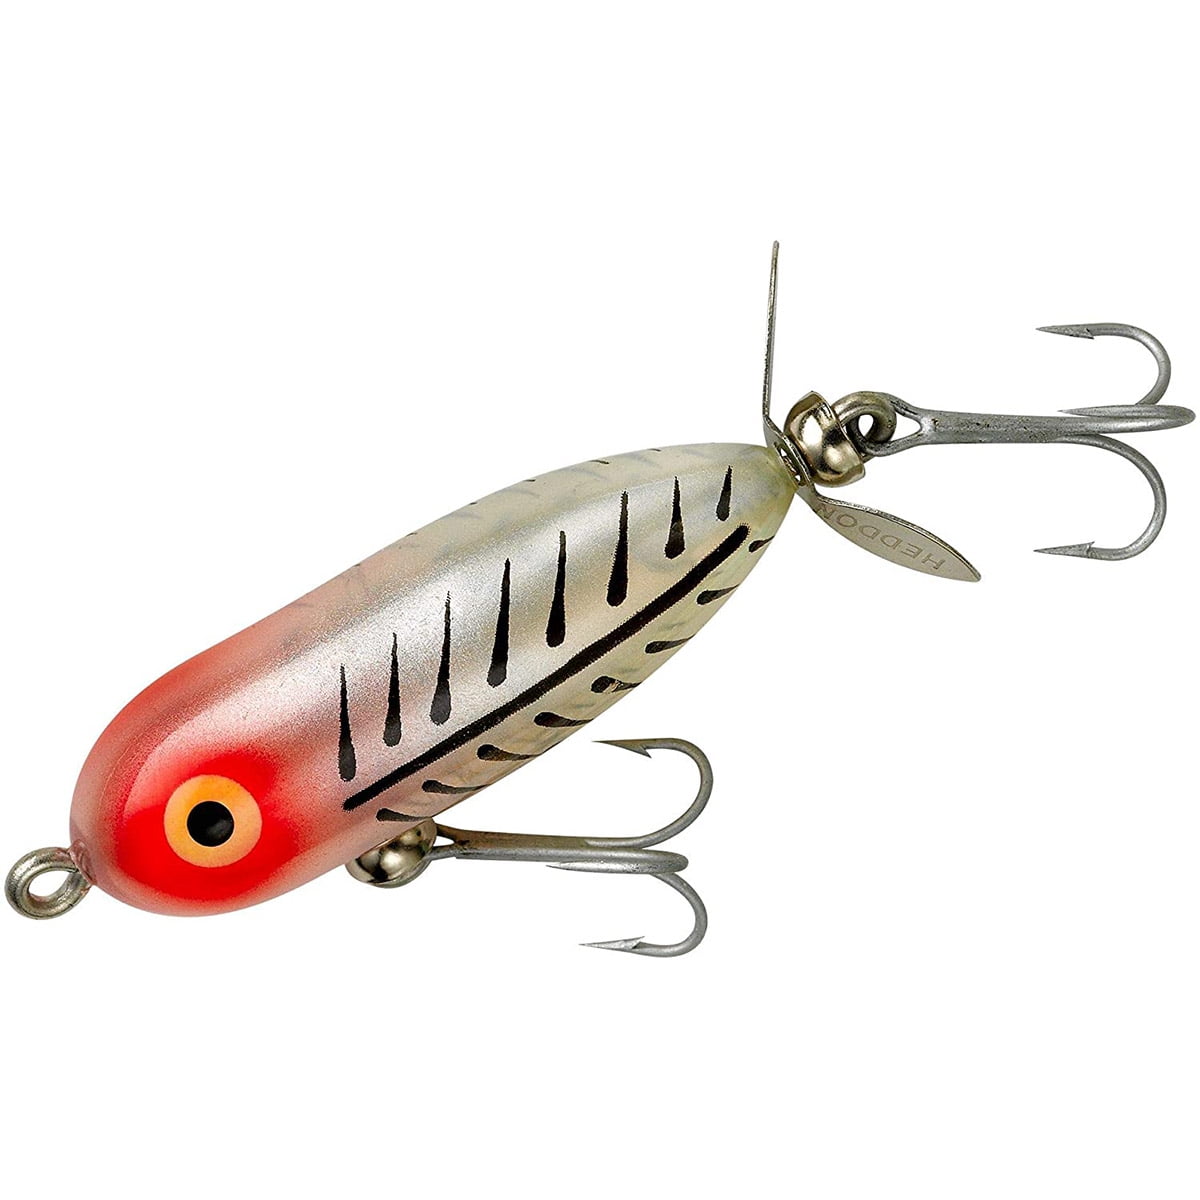 Sold at Auction: Vintage Heddon Slim Torpedo Minnow Lure in Shiner Finish